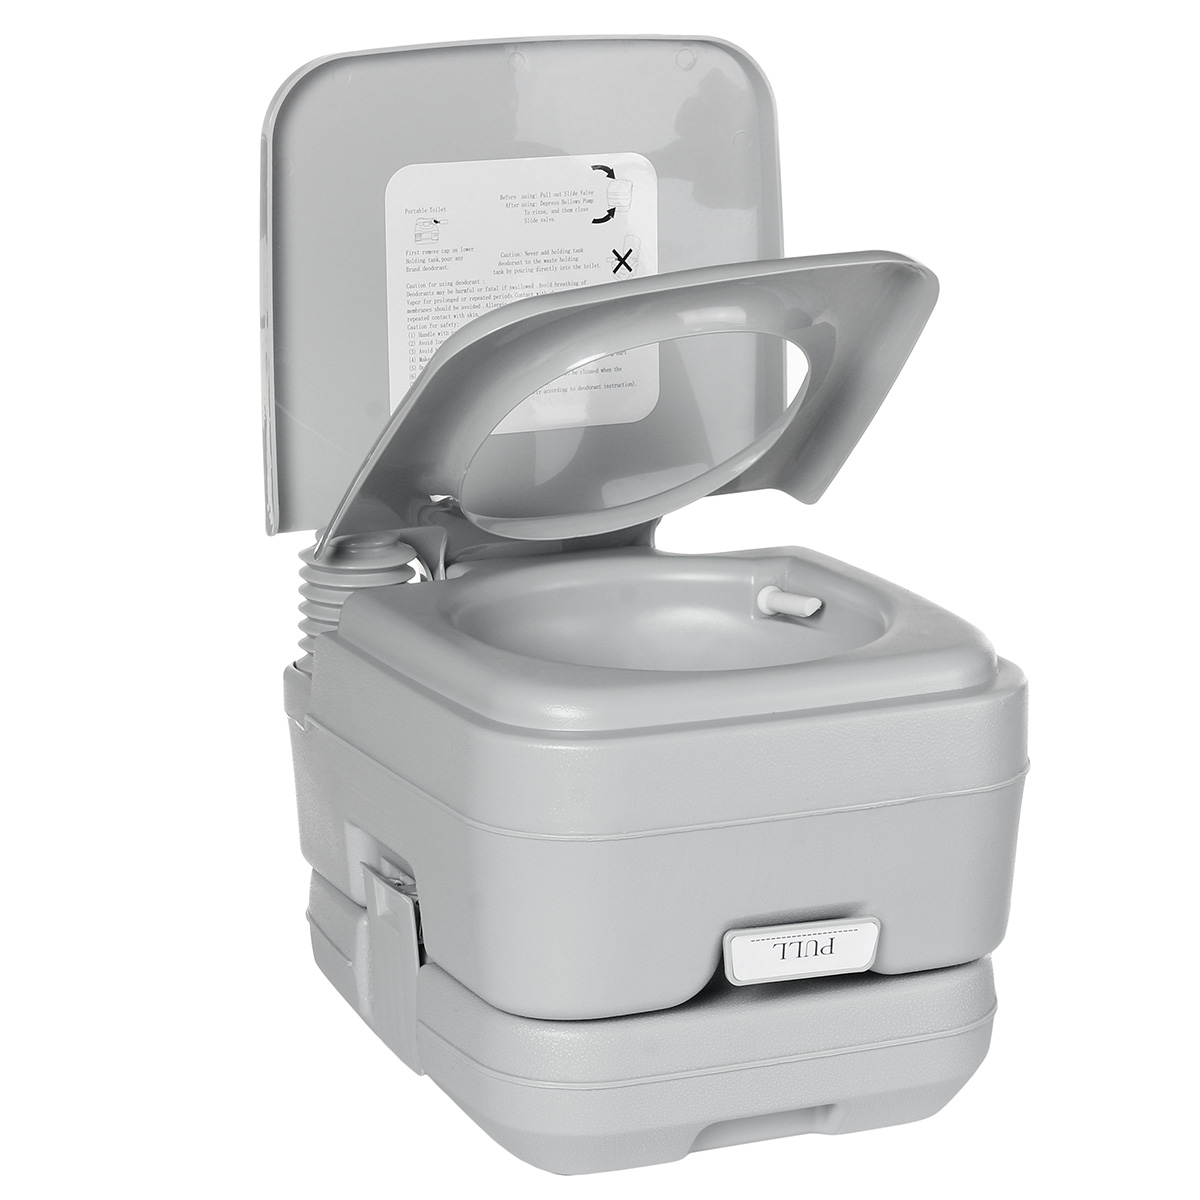 

10L/12L/20L Portable Toilet for Elderly Home Travel Camping Commode Potty Indoor Outdoor